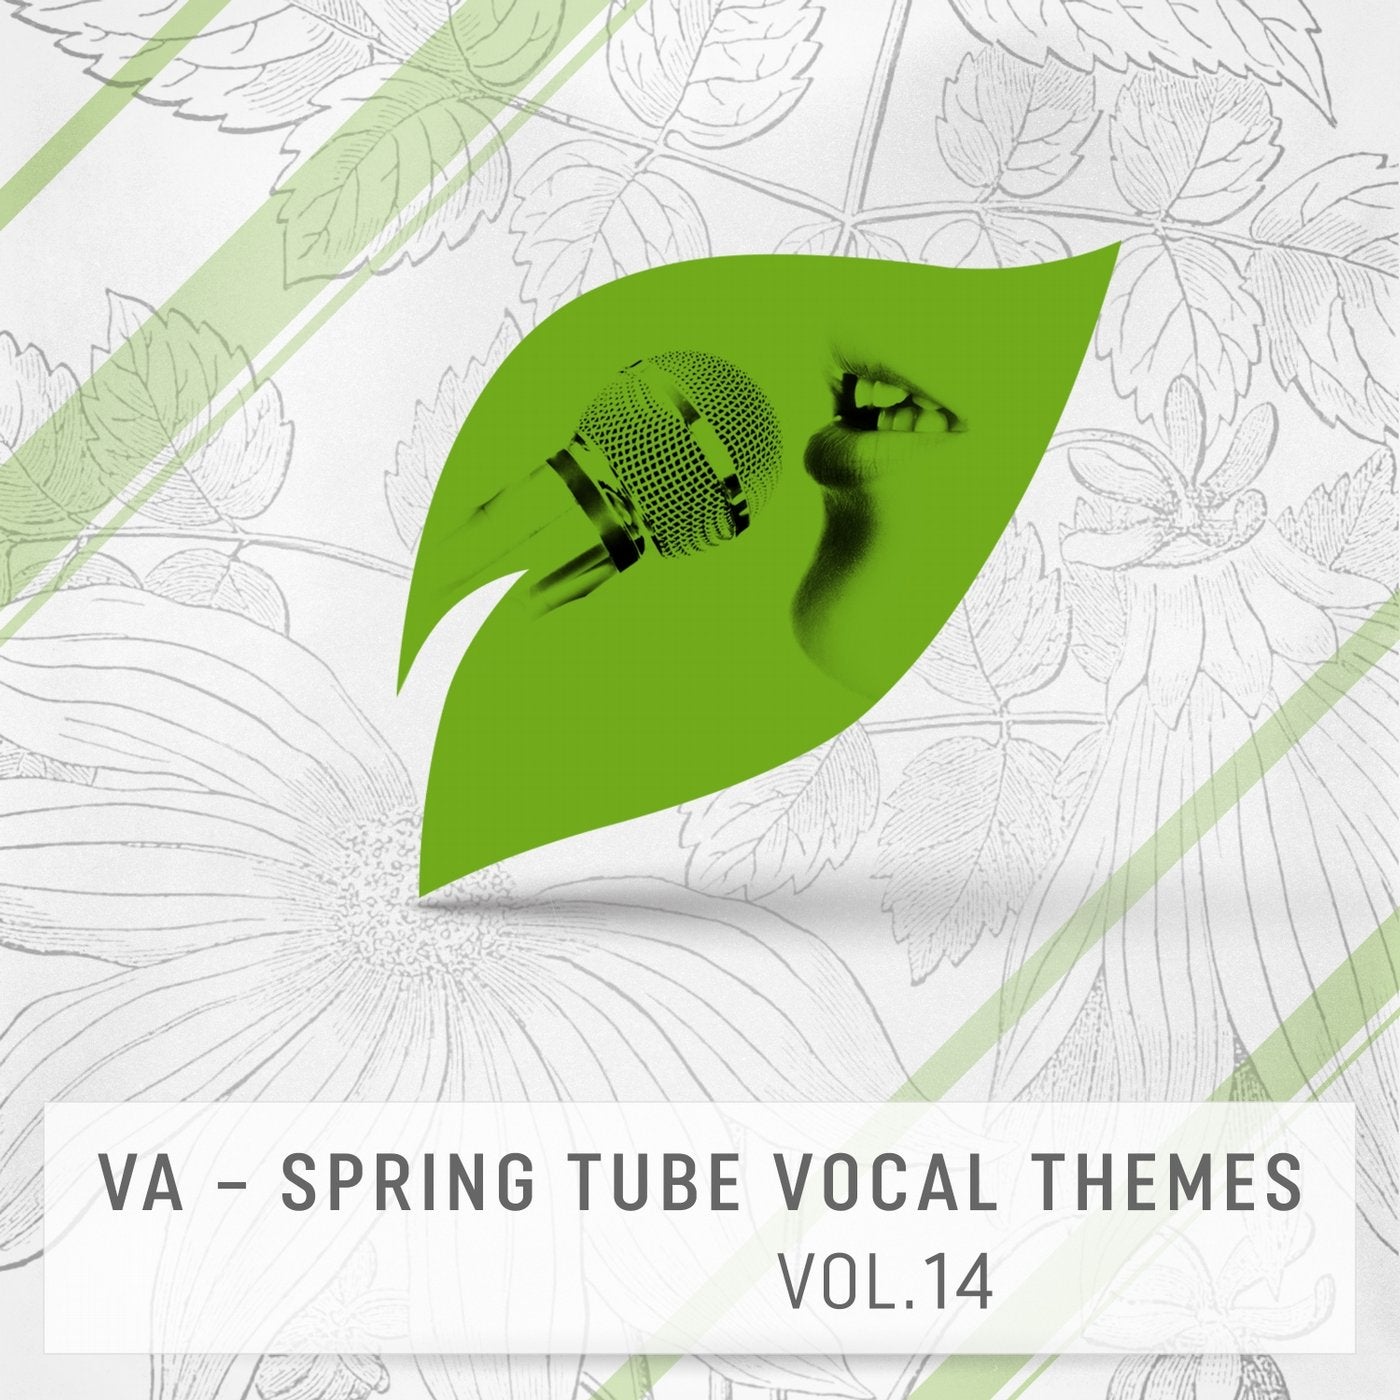 Spring Tube Vocal Themes, Vol.14